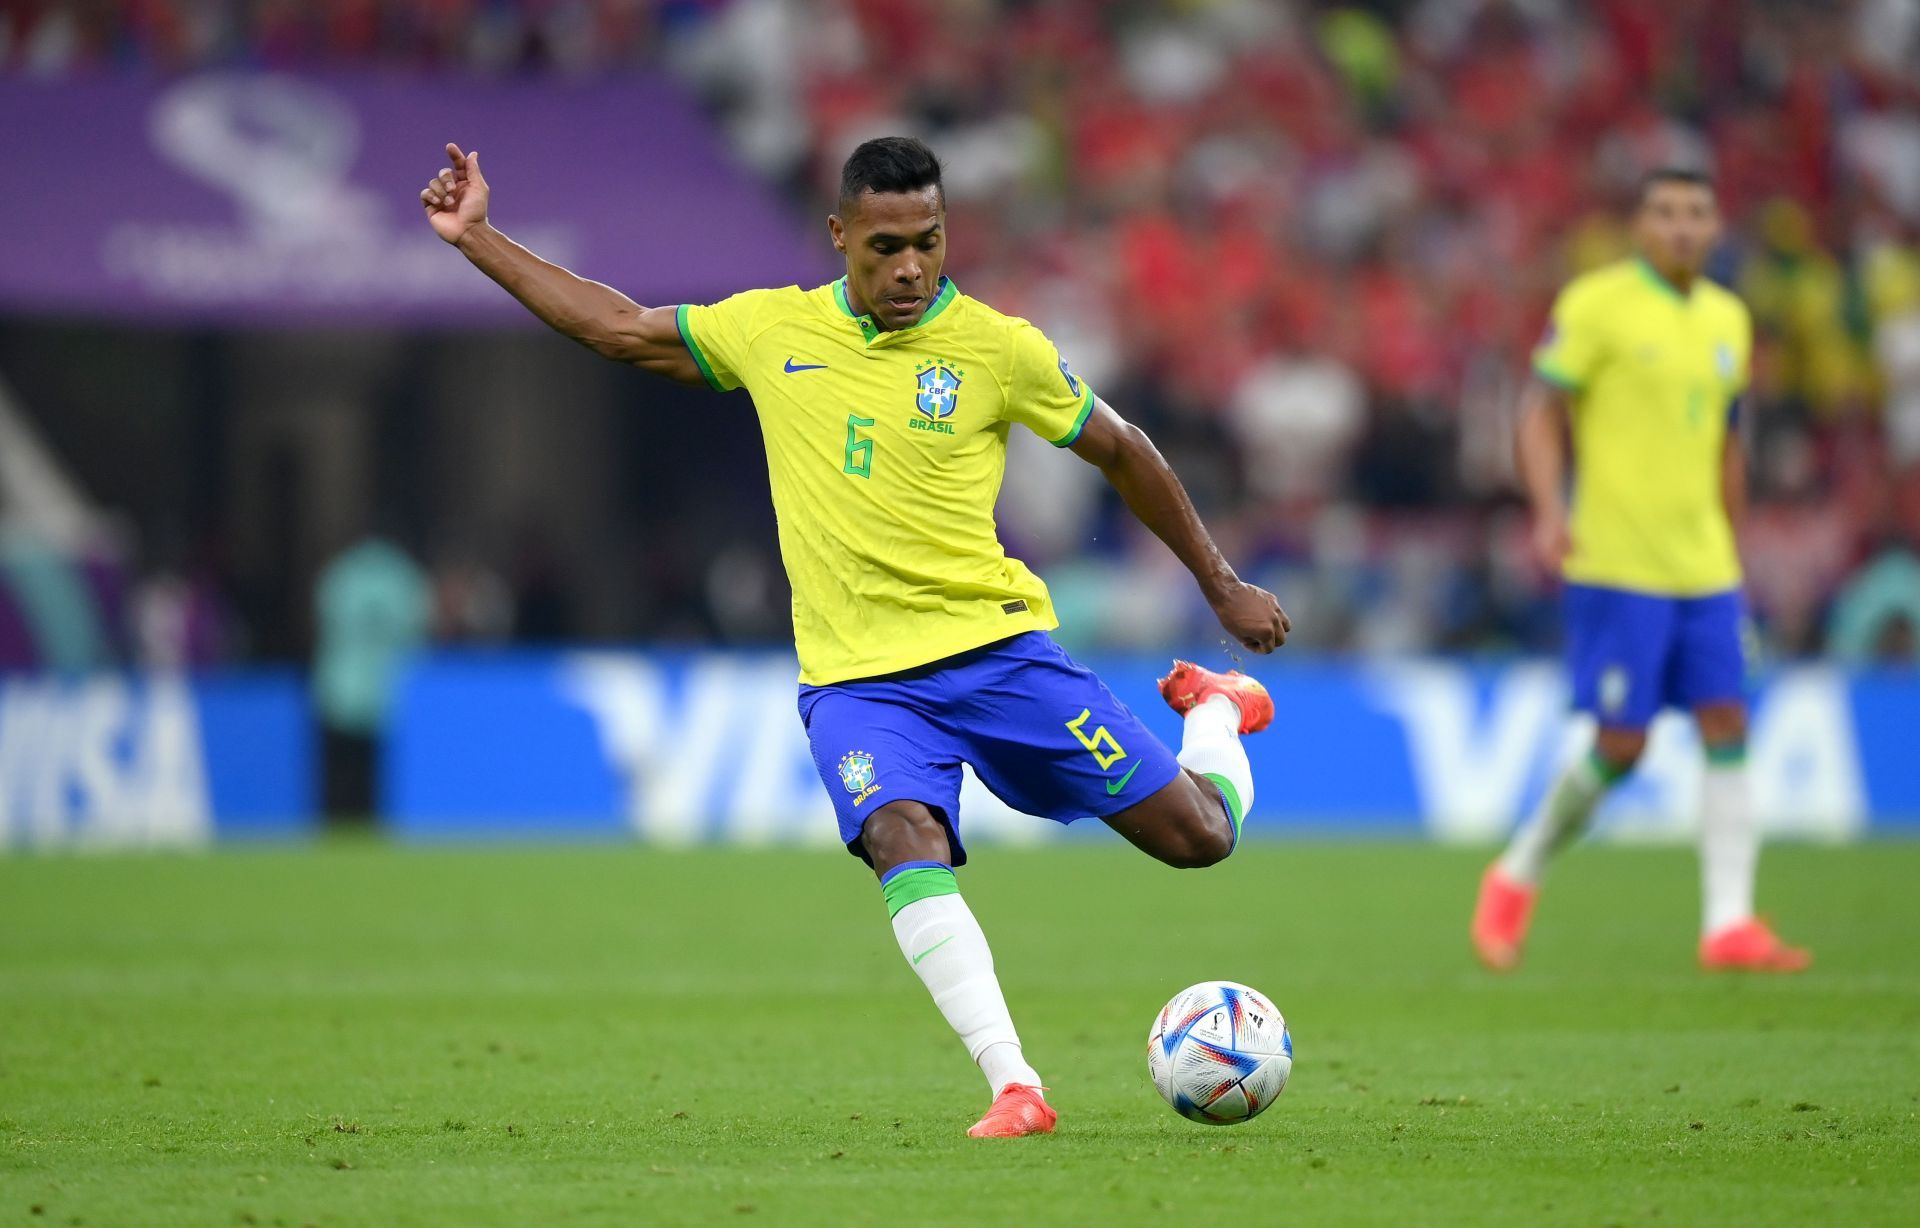 Alex Sandro was so close to opening the account for Brazil